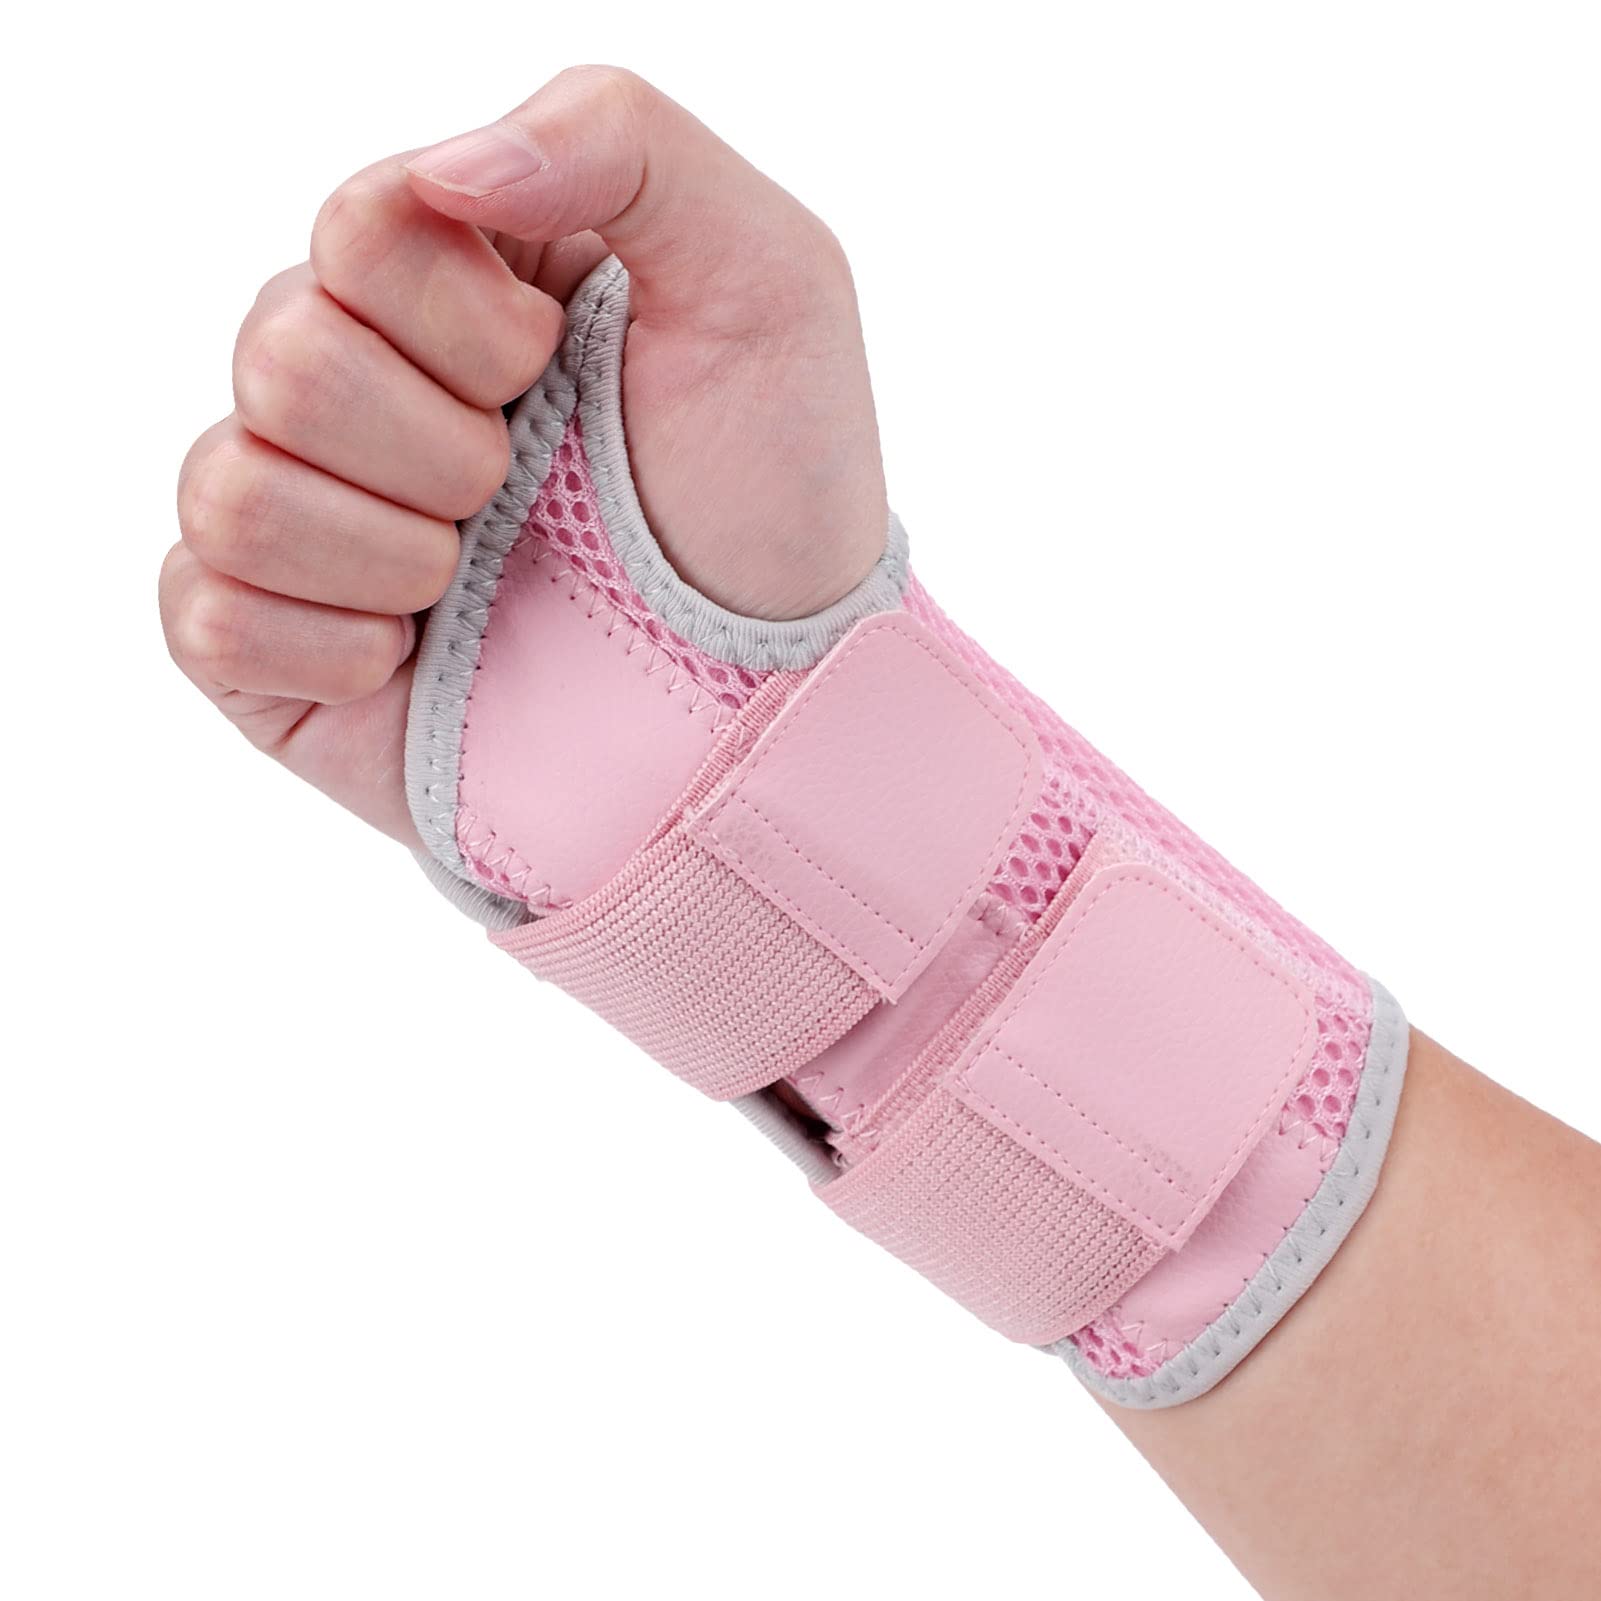 Wrist Brace for Carpal Tunnel Night Wrist Sleep Support Splint with  Compression Sleeve Adjustable Straps for